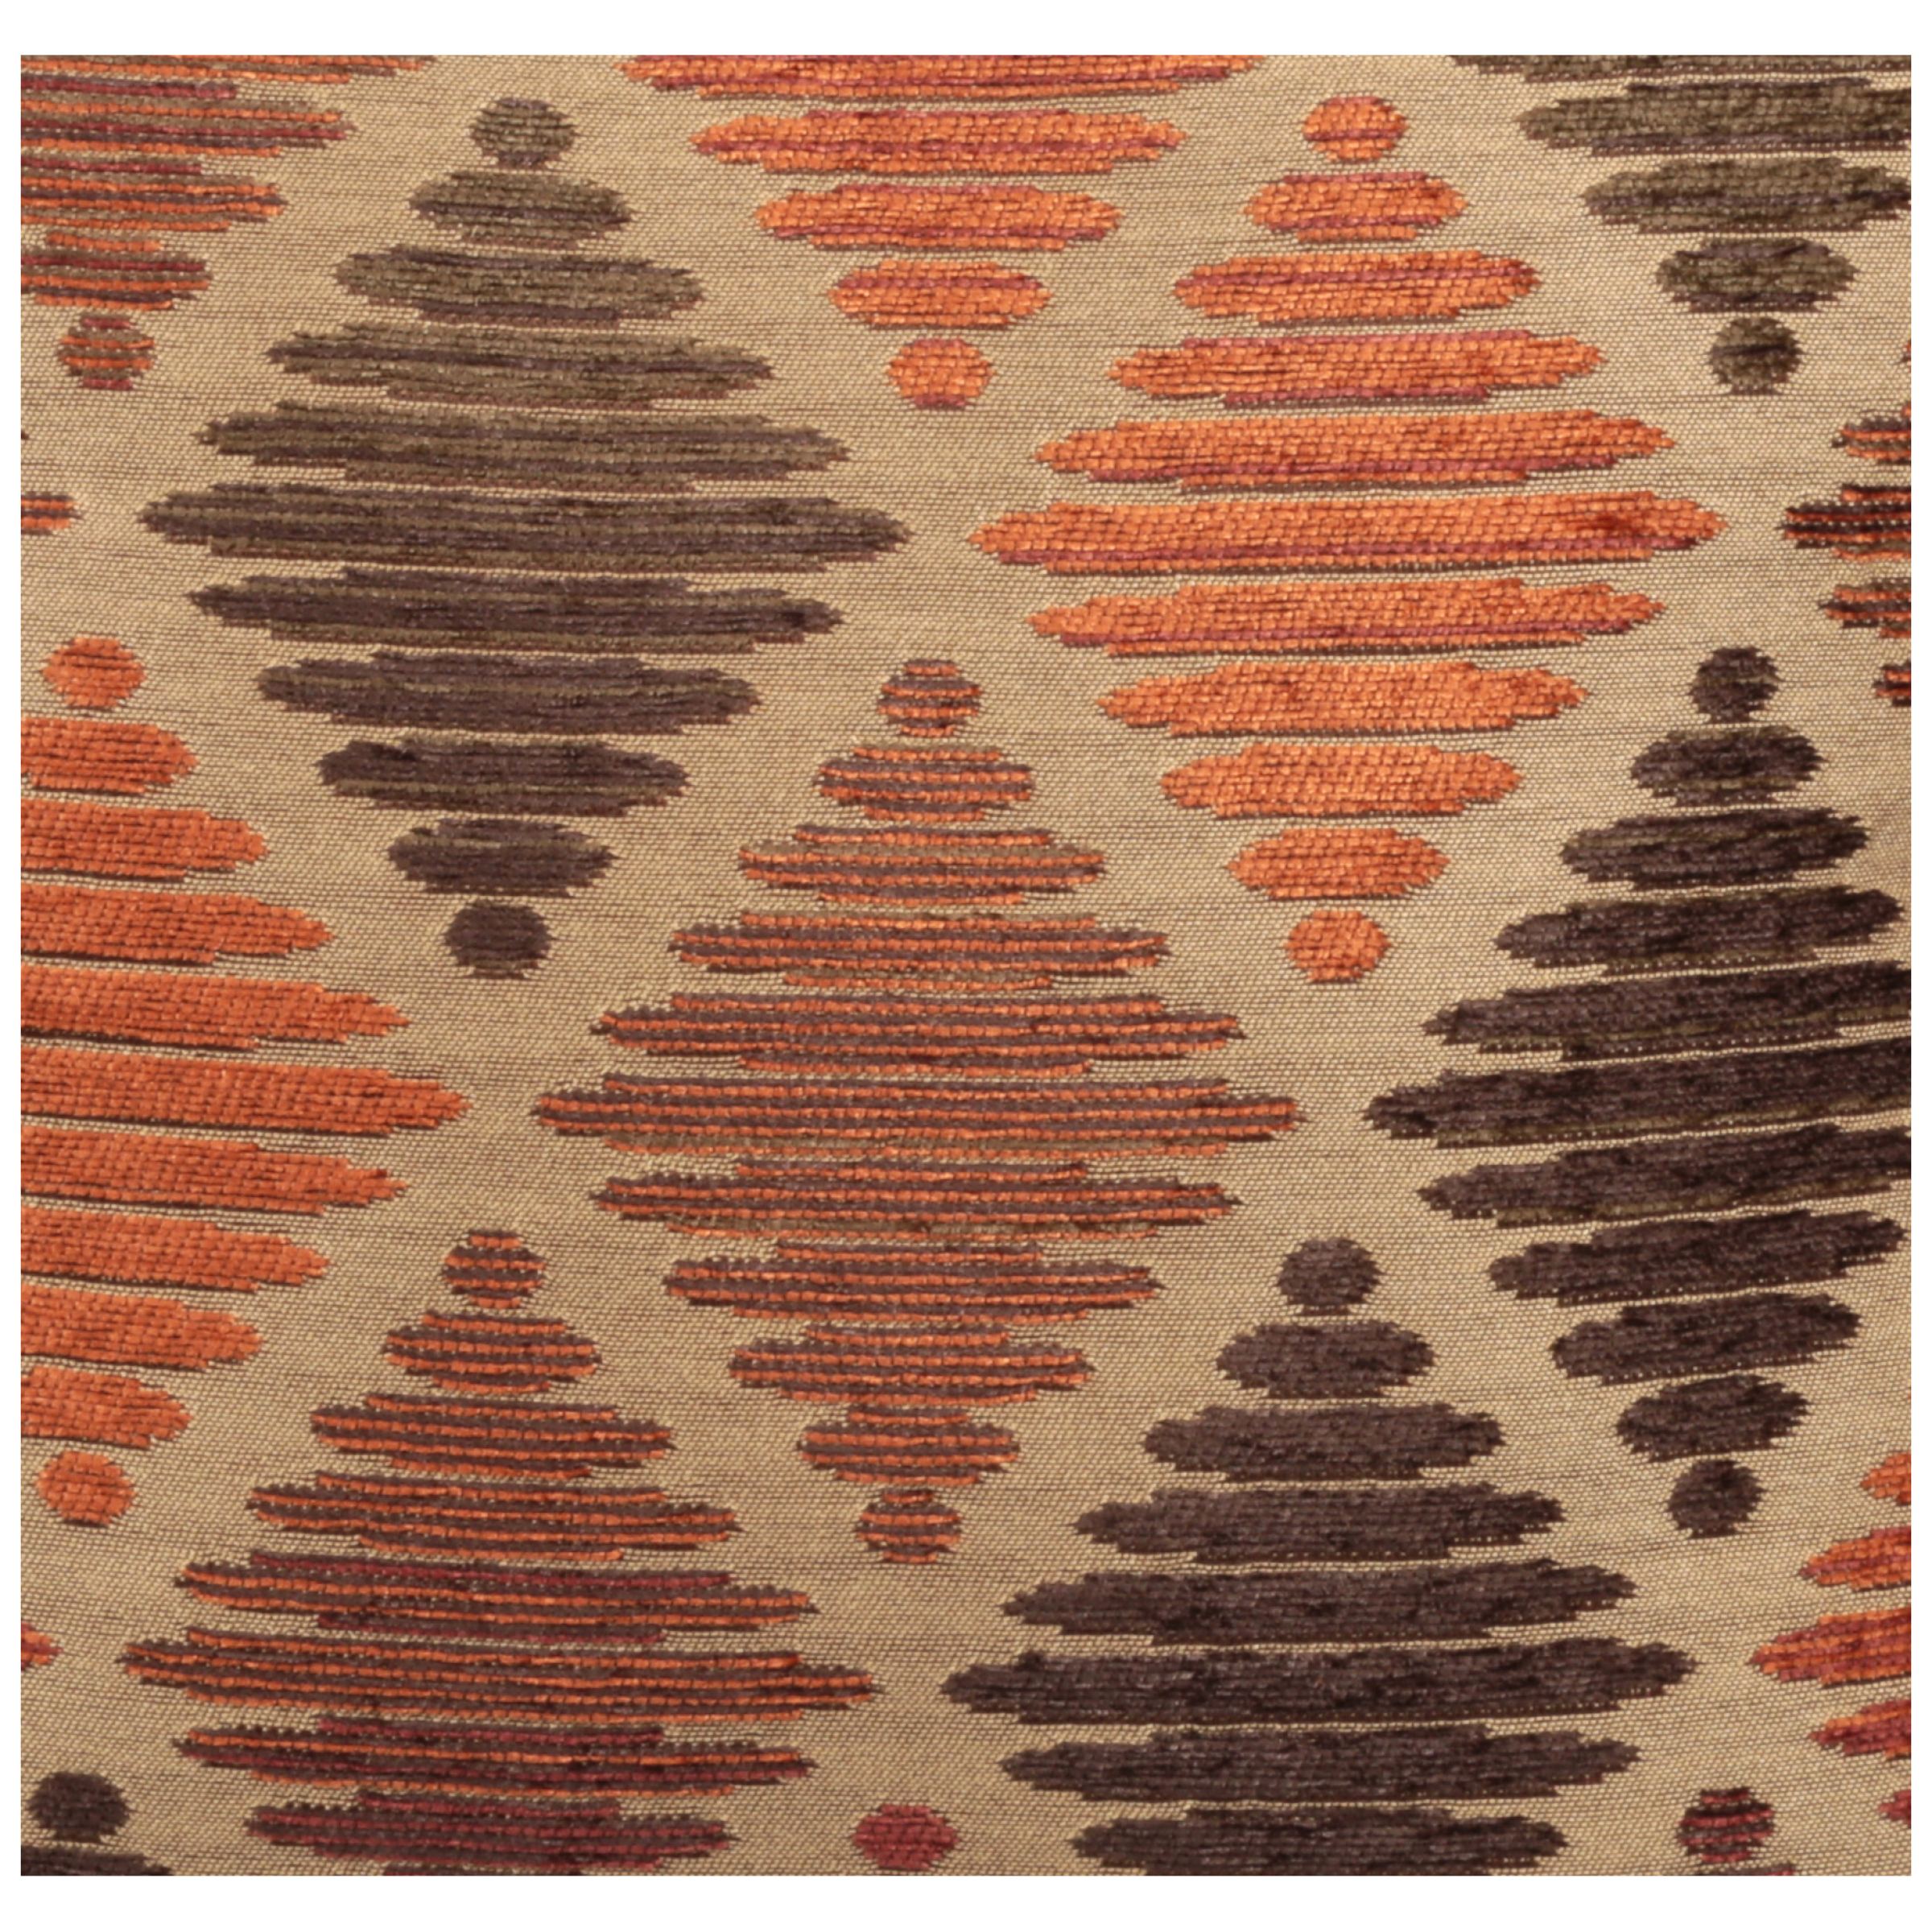 Better Homes and Gardens? Rust Diamond Pillow - image 4 of 4